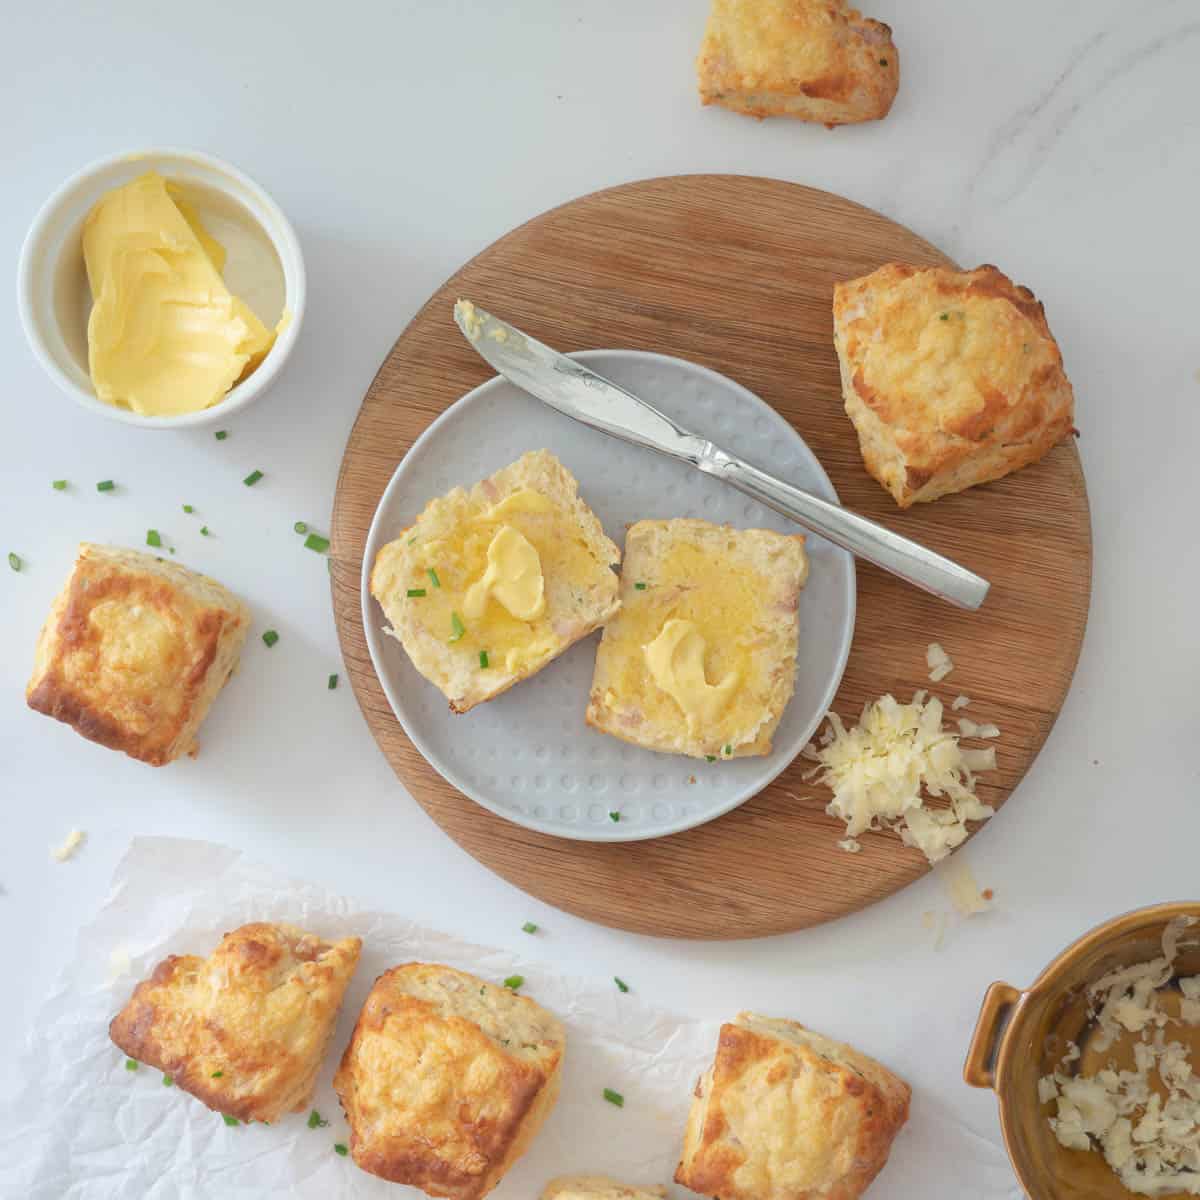 A scone split open and buttered on a wooden board surrounded by other scones and a small bowl of butter.